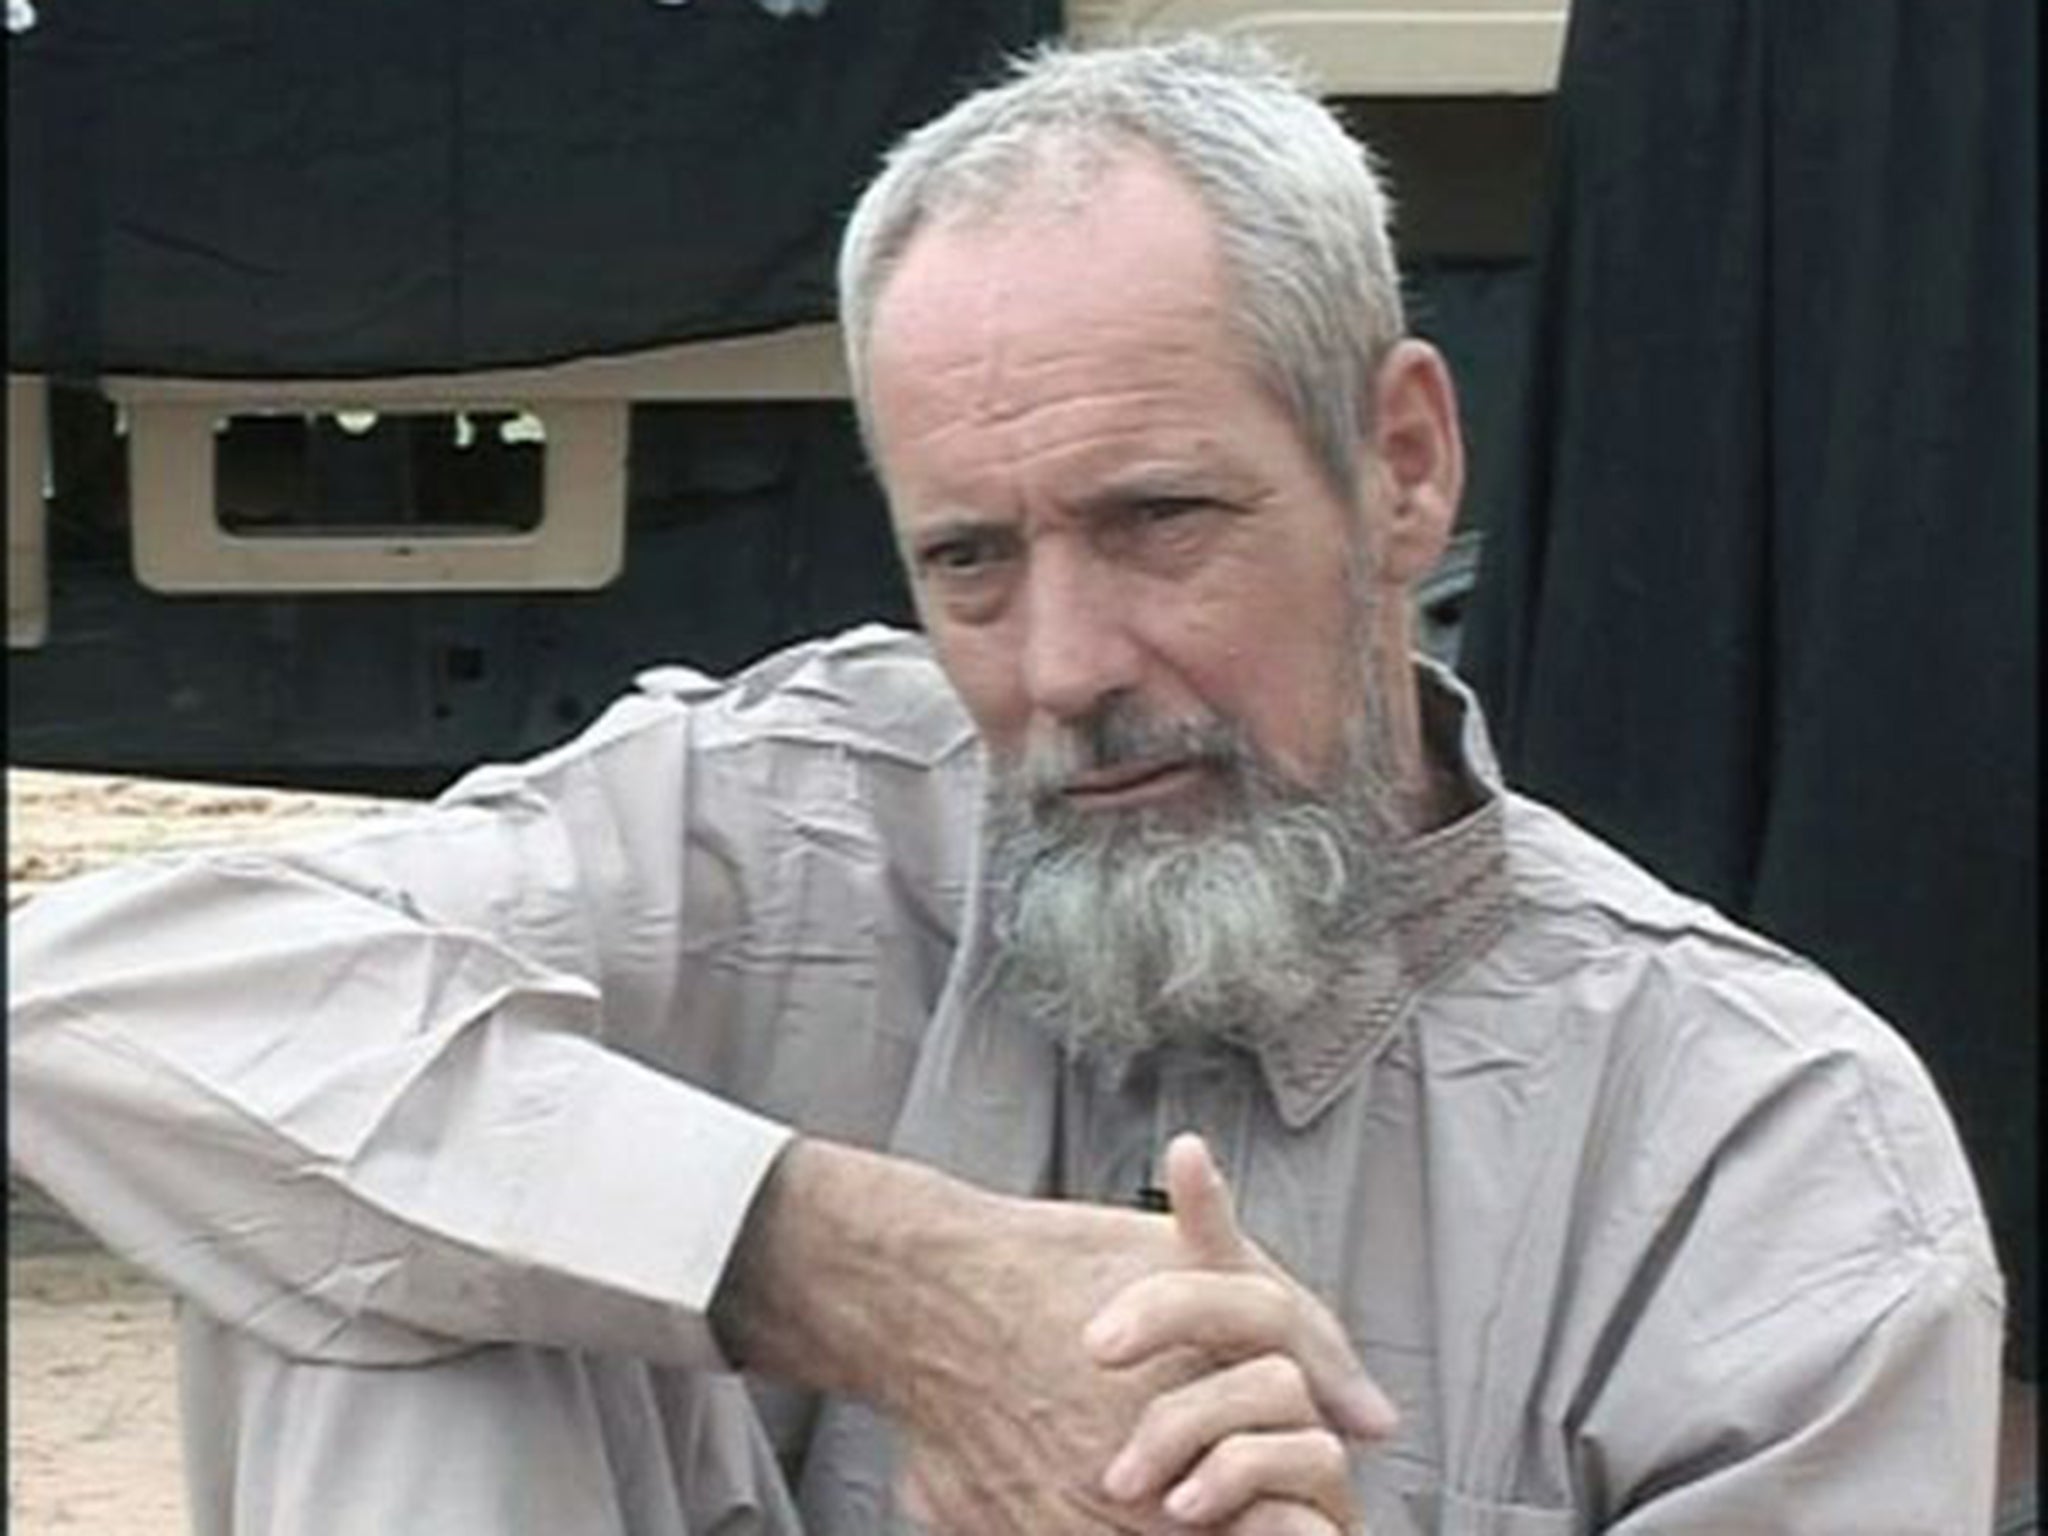 Sjaak Rijke was abducted by extremists in November 2011 from a hostel in Timbuktu